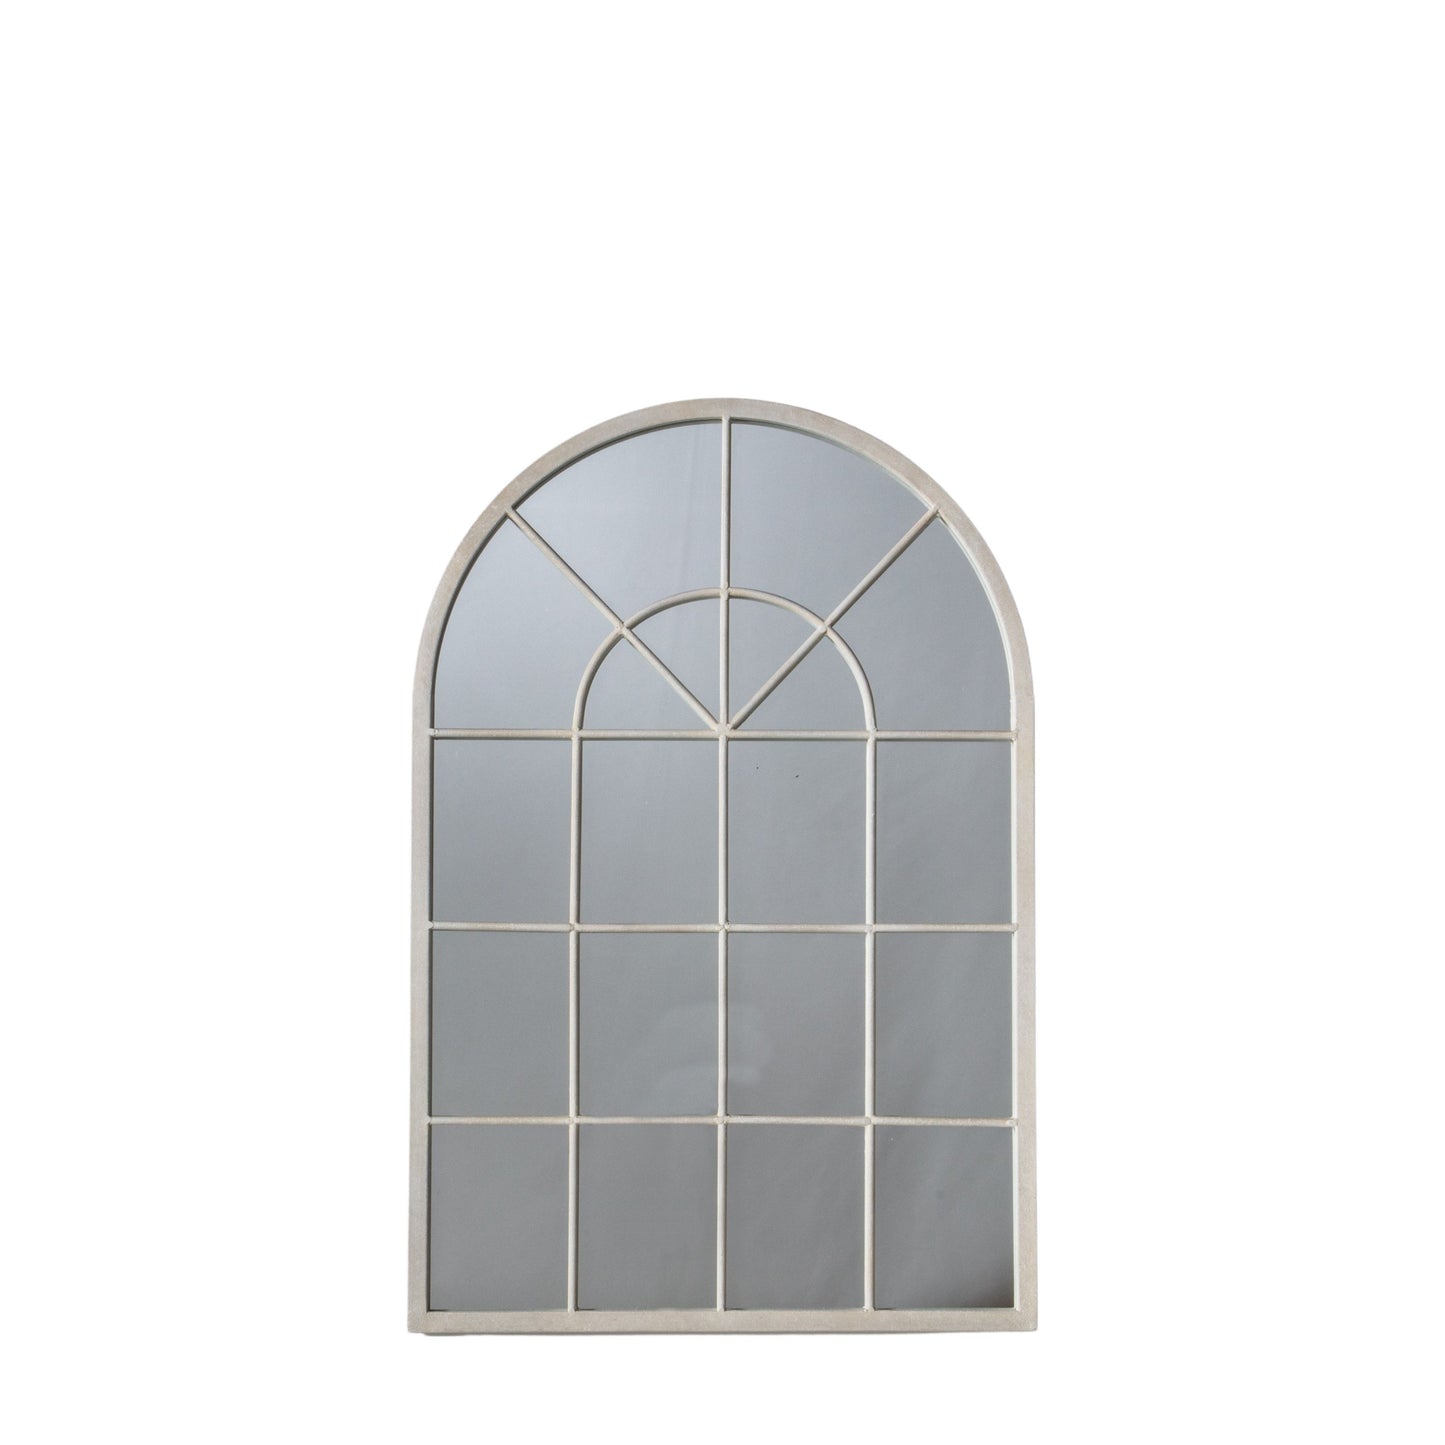 Arched Top Metal Window Mirror